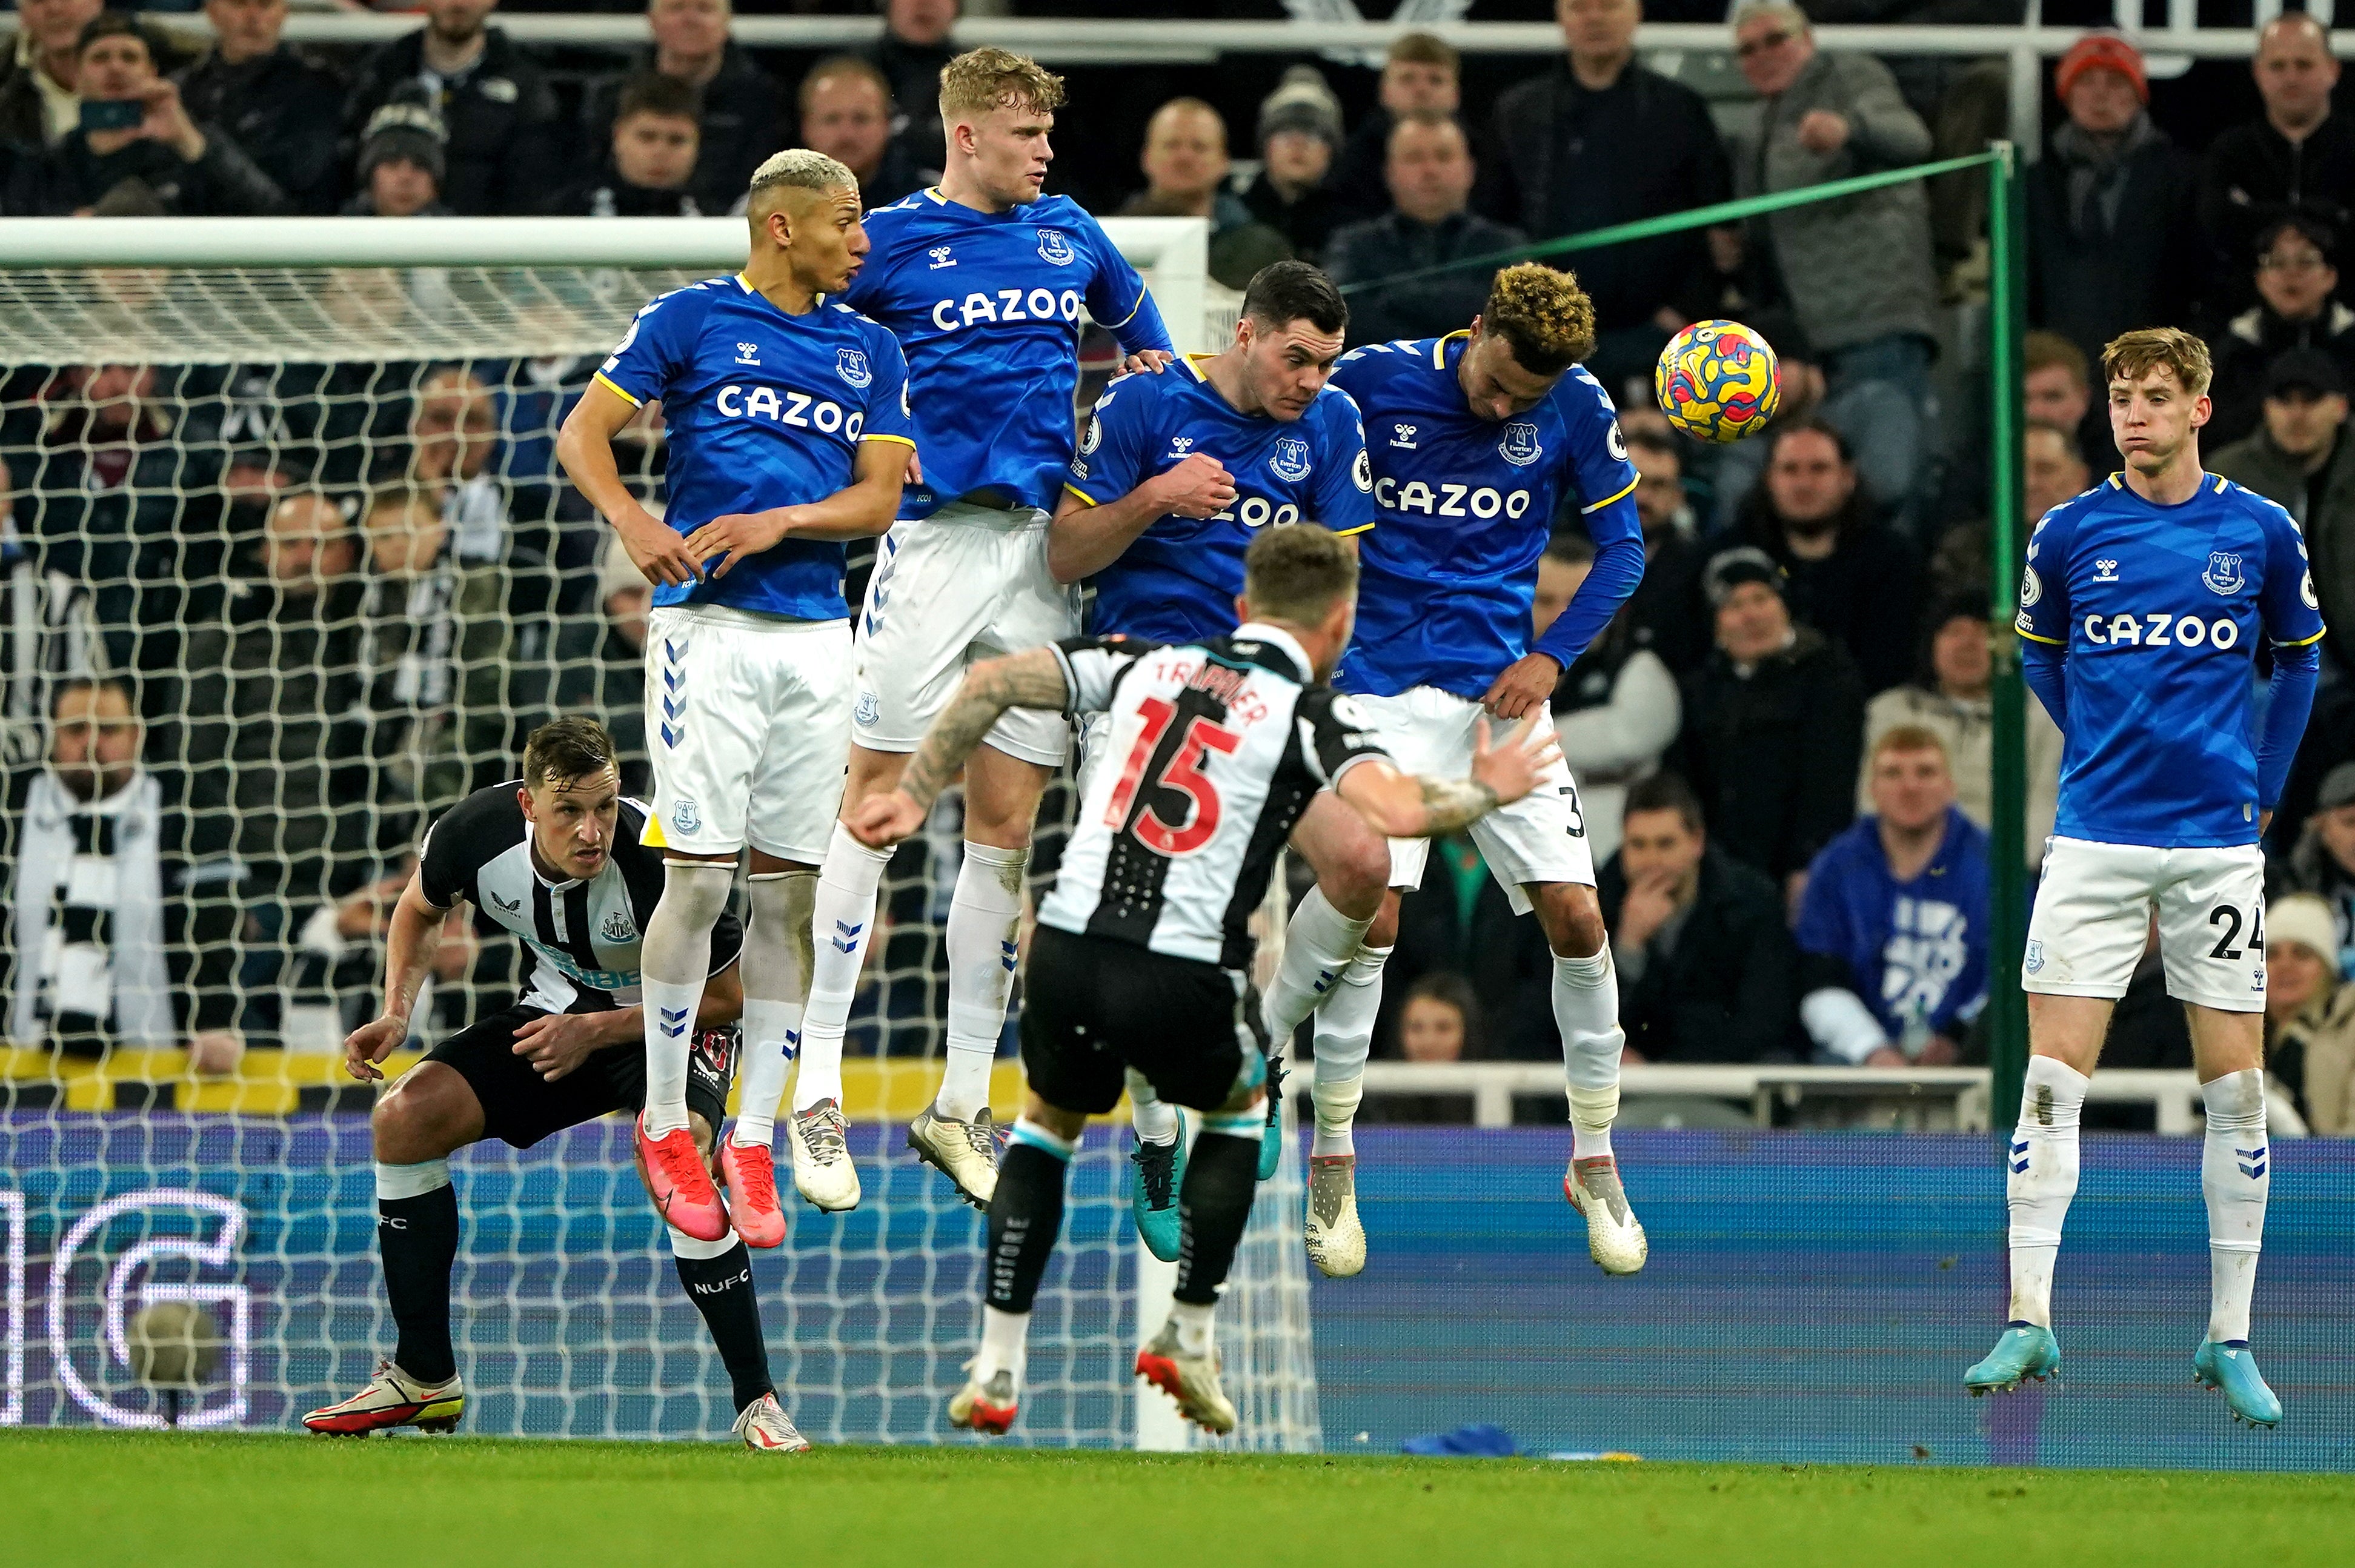 Newcastle United’s Kieran Trippier scores his side’s third goal in the 3-1 win over Everton (Owen Humphreys/PA)